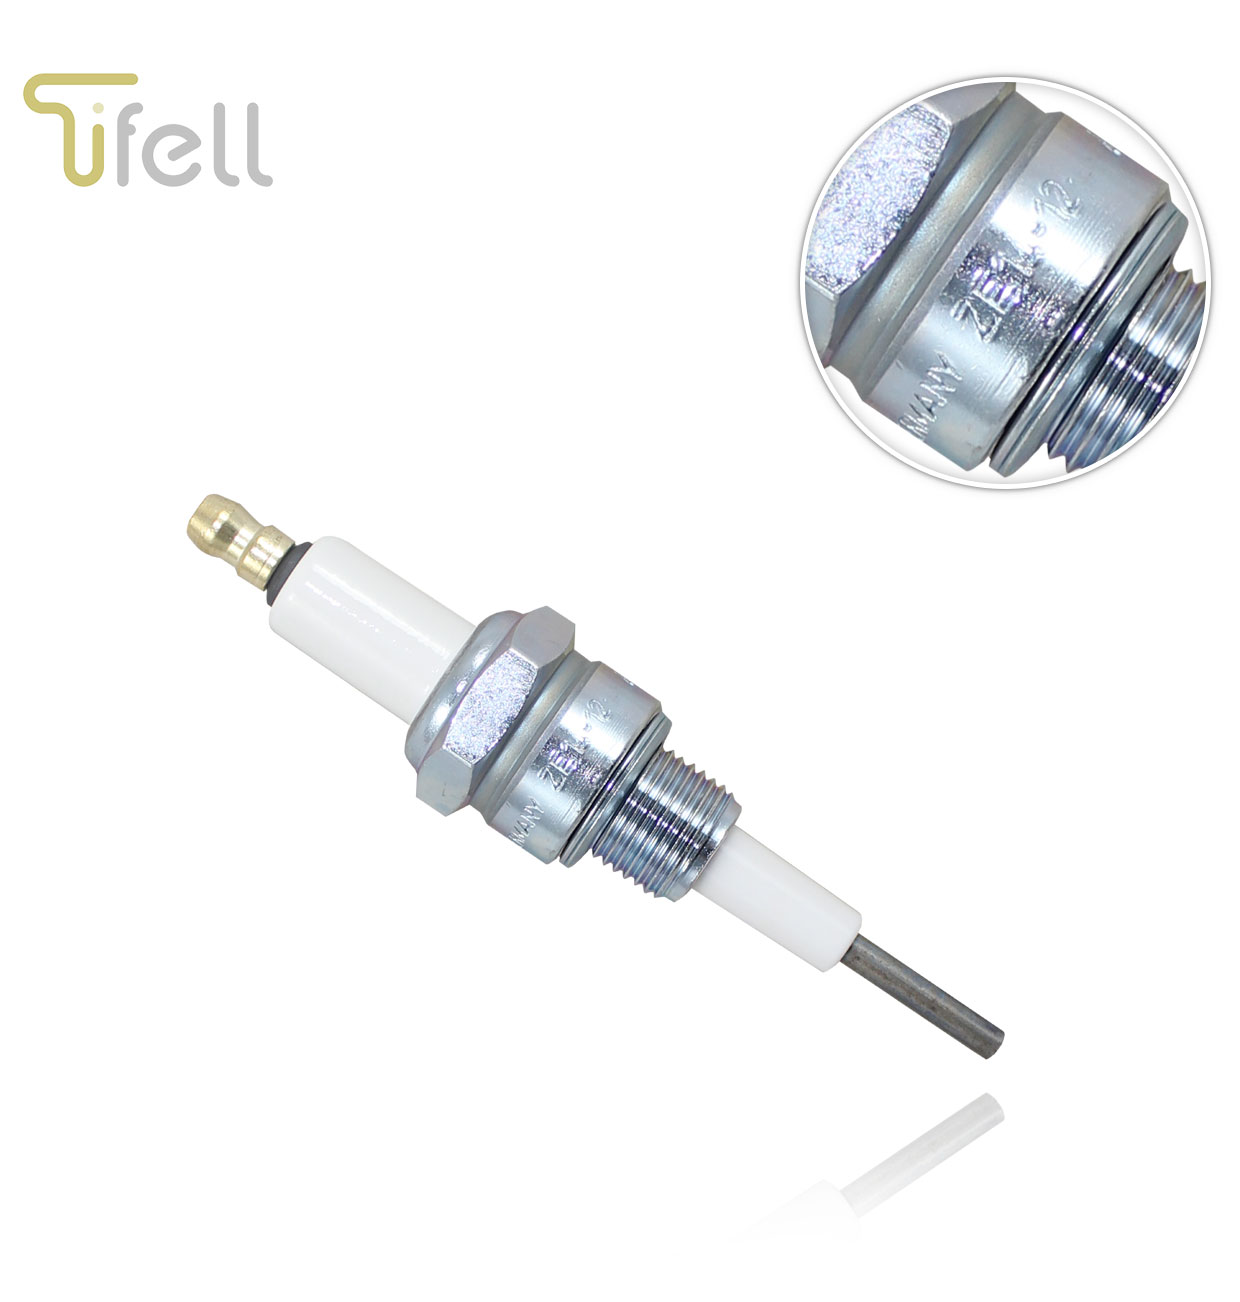 CT133WRA8A ETHERMA TIFELL IGNITION ELECTRODE